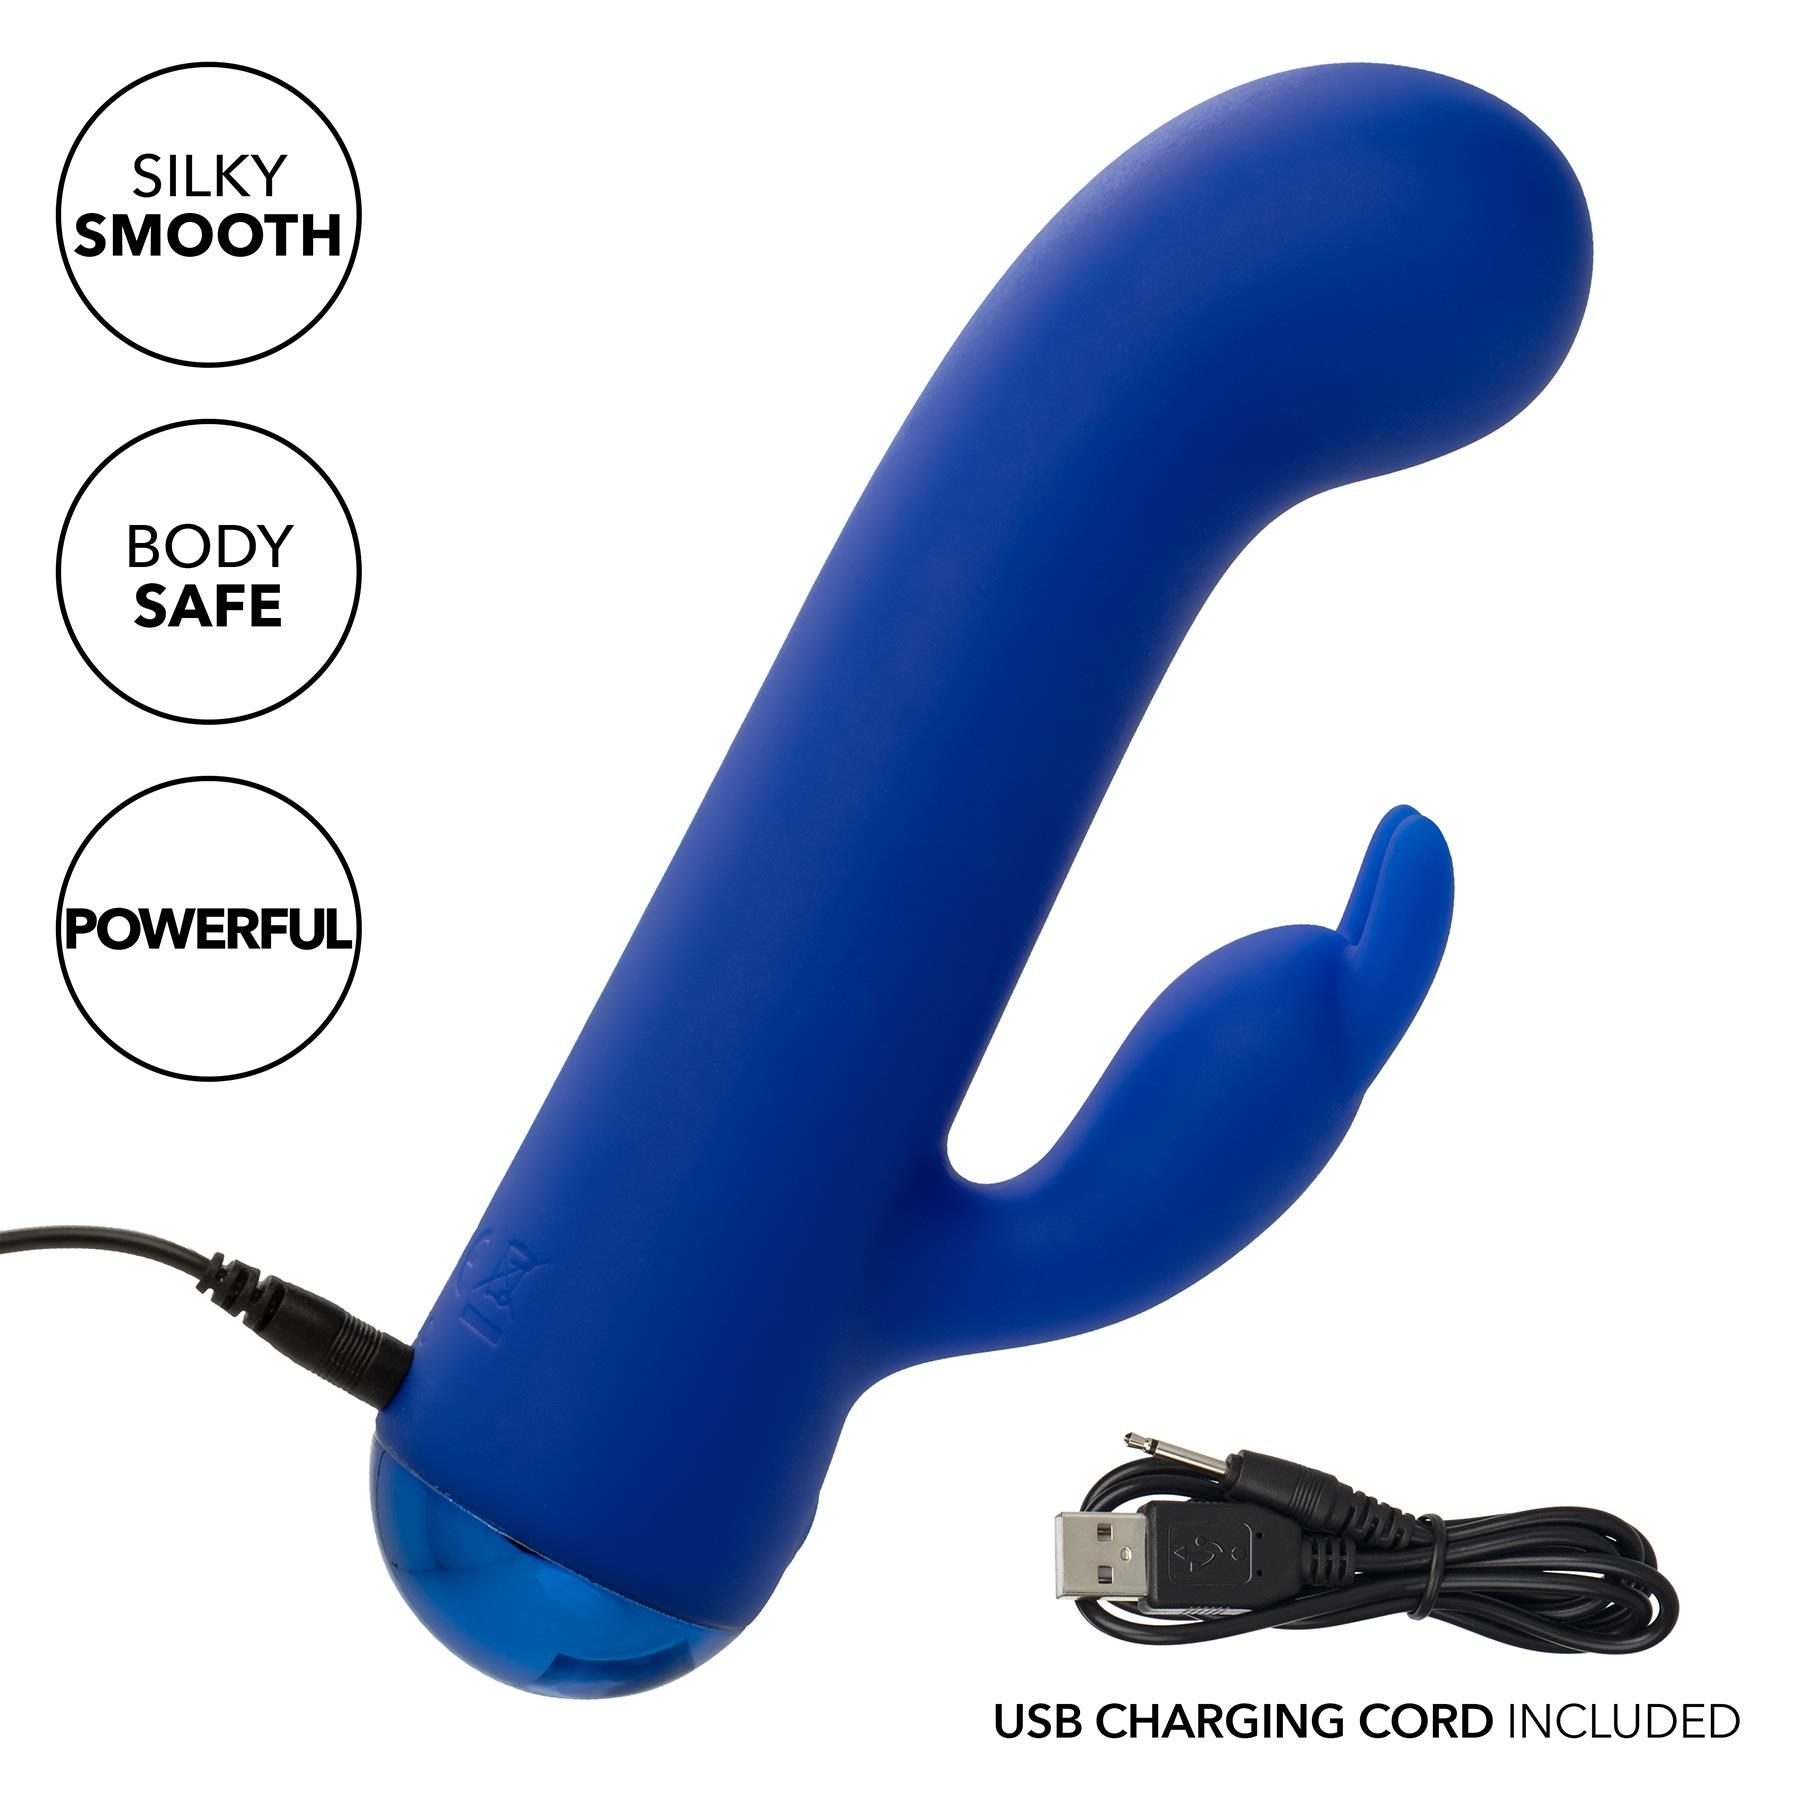 Thicc Chubby Bunny G-Spot Rabbit - Showing Where Charging Cable is Placed